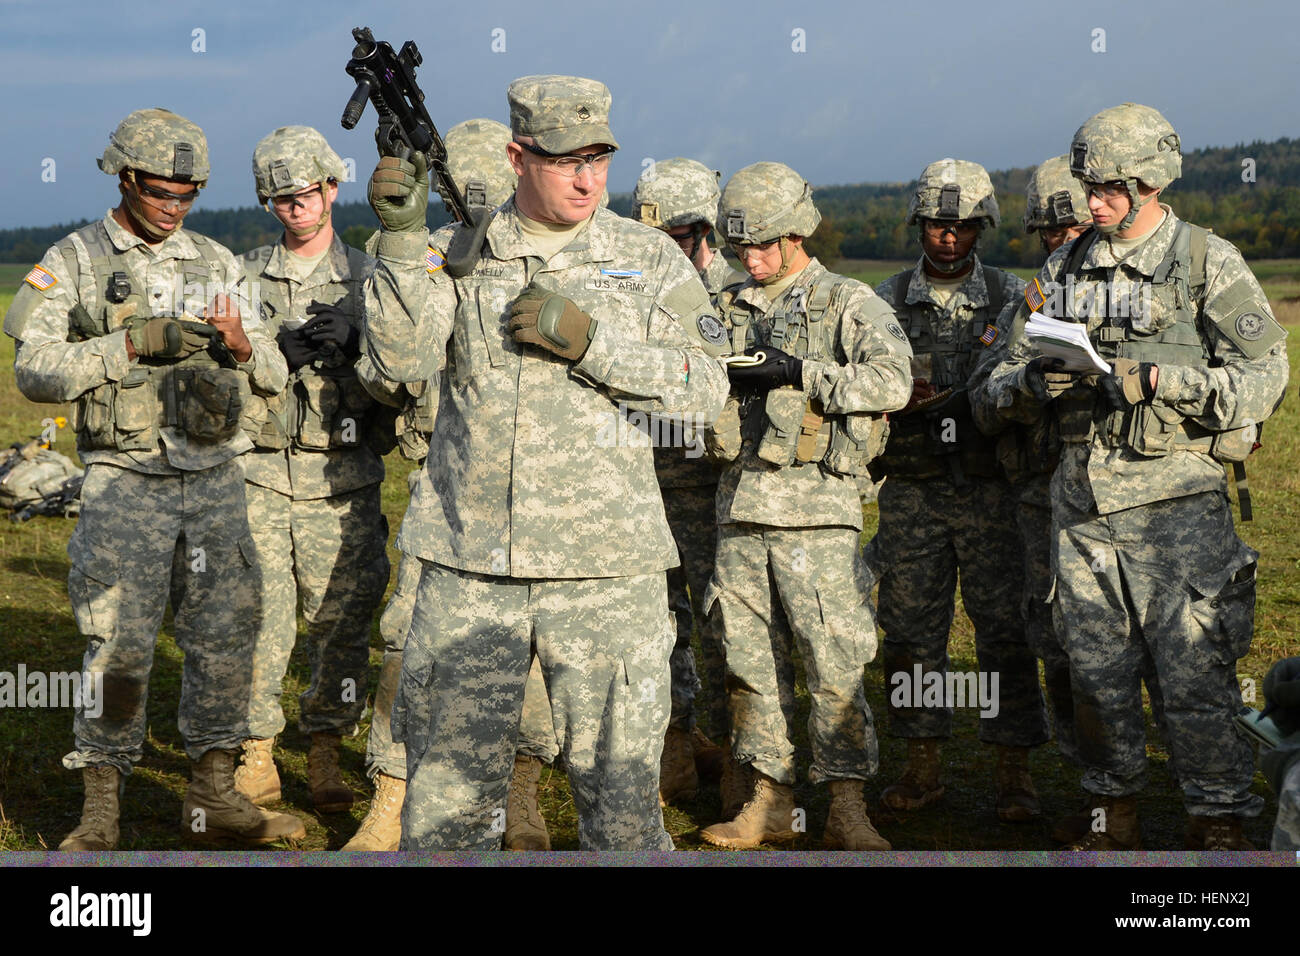 U.S. troopers with 2nd Cavalry Regiment (2CR) receive instructions on how unload and clear the M320 grenade launcher while training for the 2CR Expert Infantryman Badge qualification at the 7th Army Joint Multinational Training Command’s Grafenwoehr Training Area, Germany, Oct. 16, 2014. (U.S. Army photo by Pfc. Nathanael Mercado/Released) 2014 EIB 141016-A-DN311-046 Stock Photo